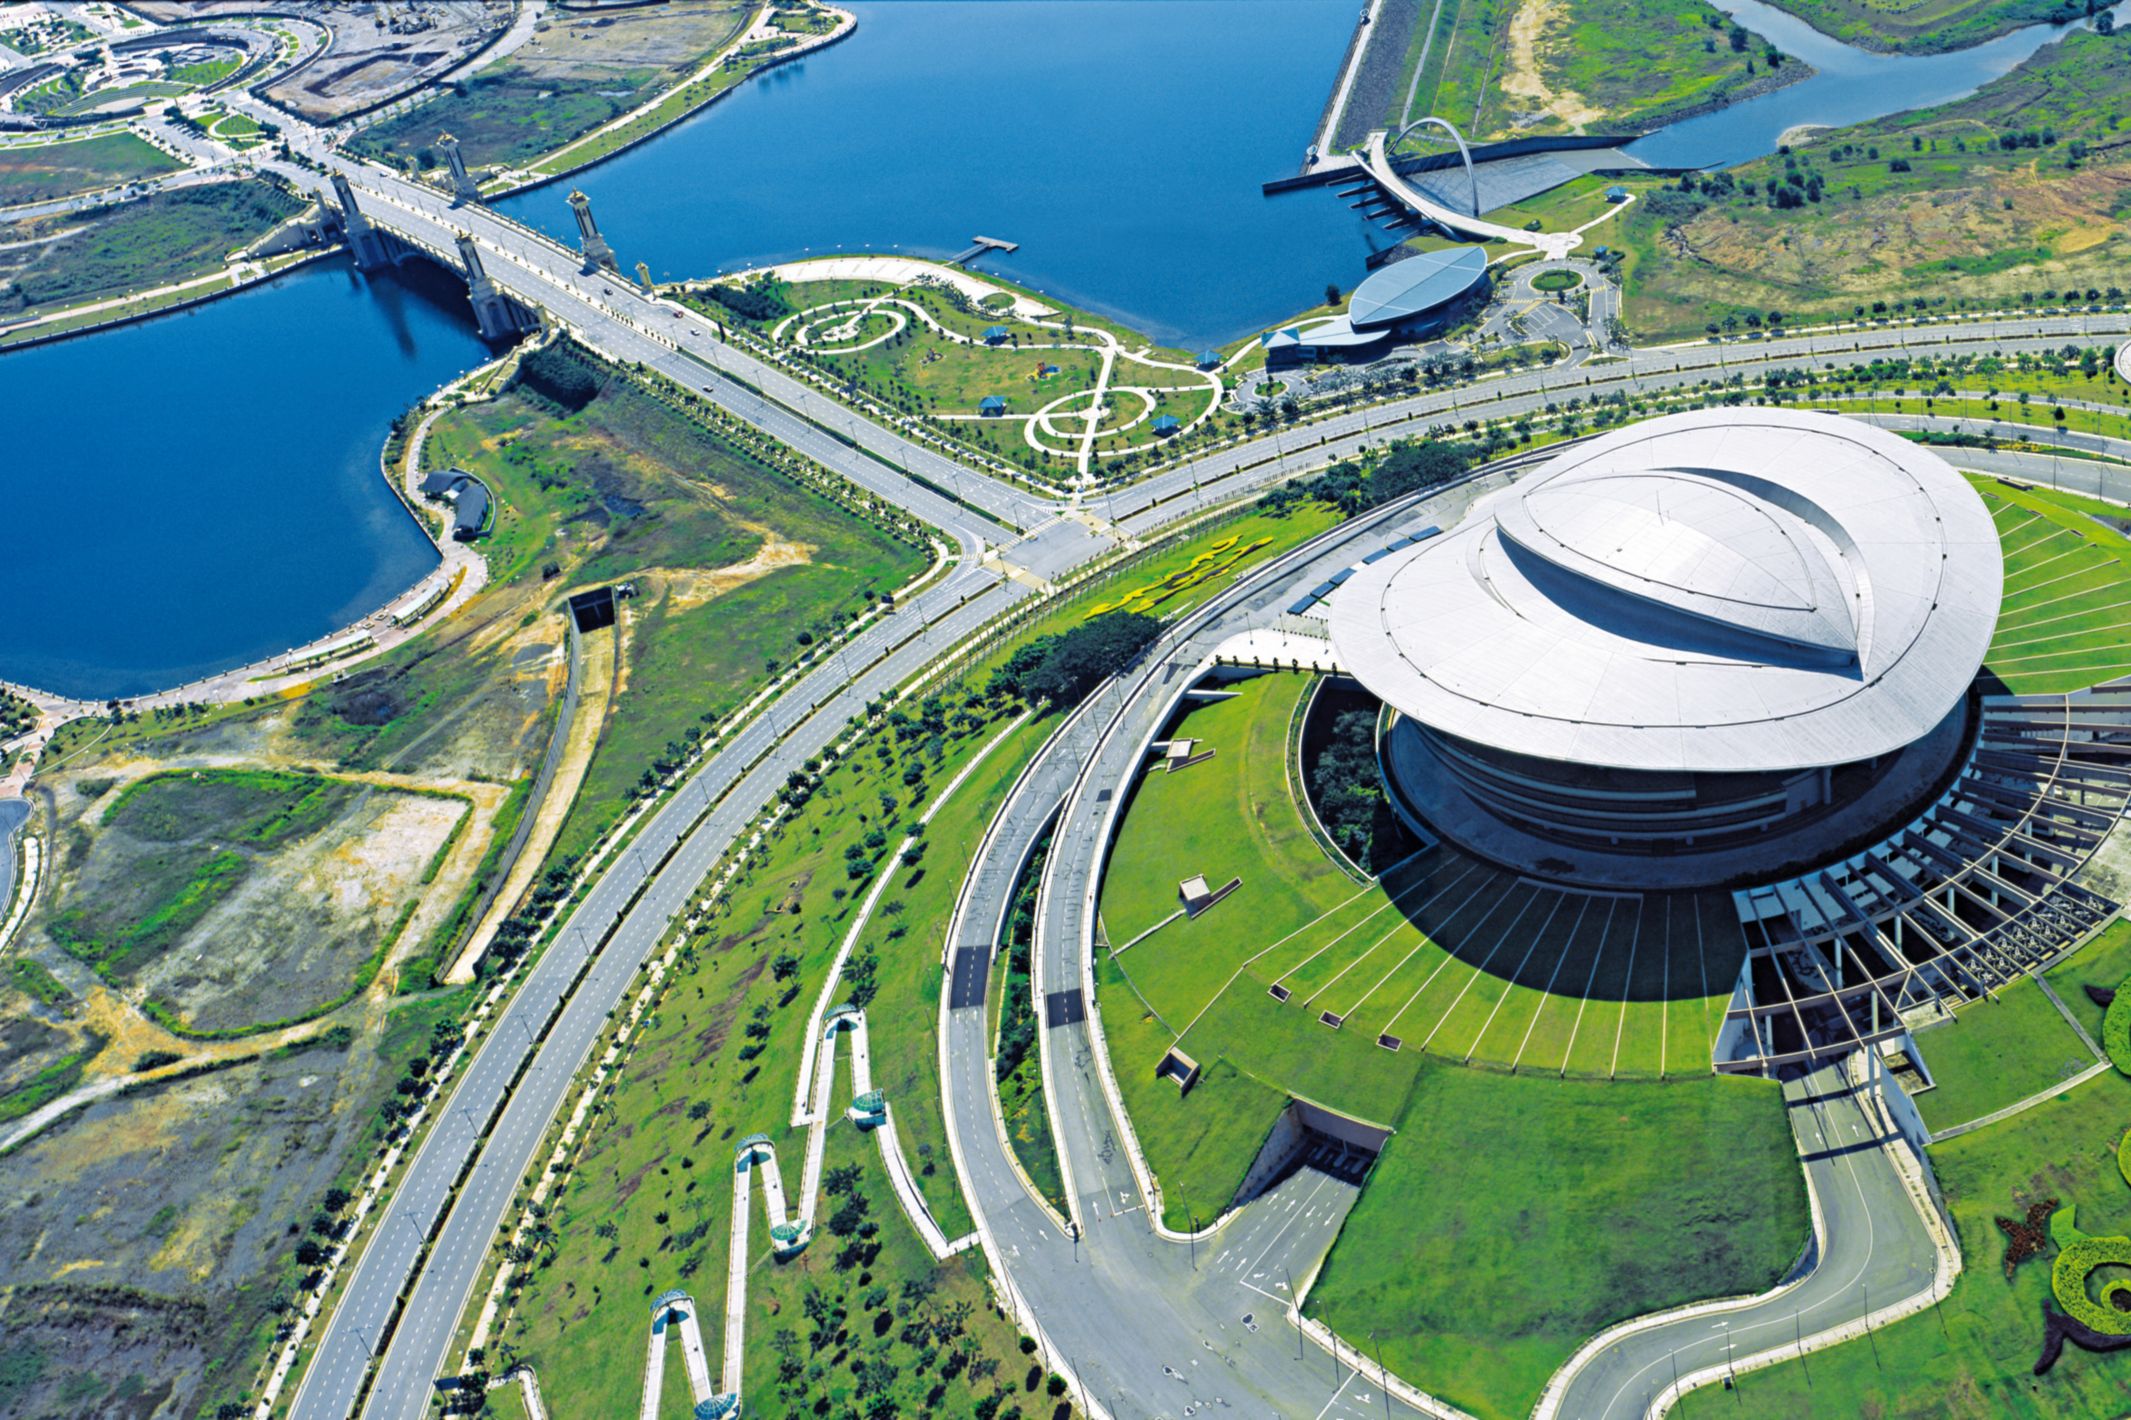 Single-ply roof PVC membrane of Sarnafil adhered roofing system installed on Putrajaya Convention Centre in Malaysia